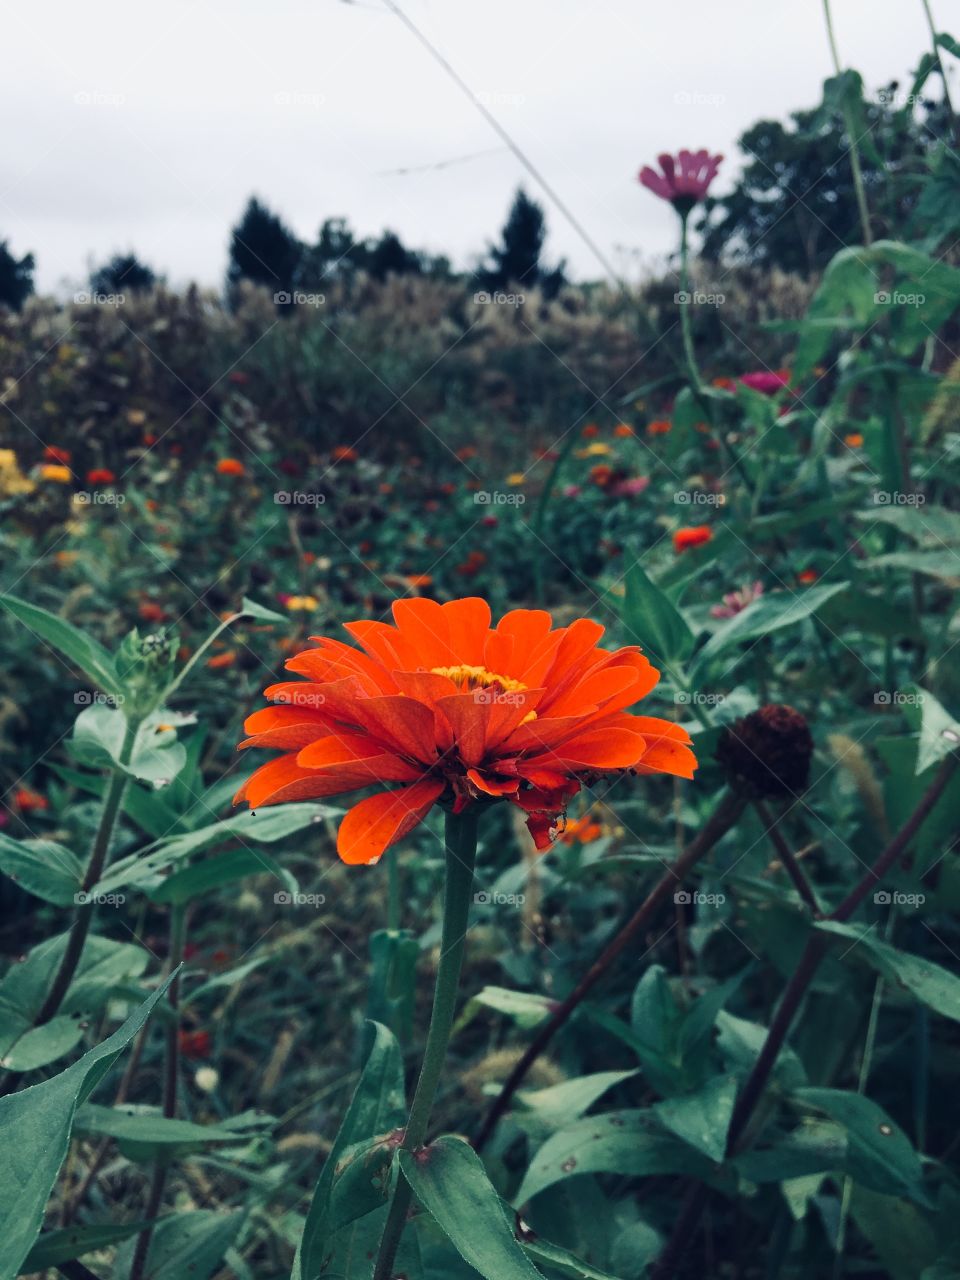 A single orange flower surrounded my others 